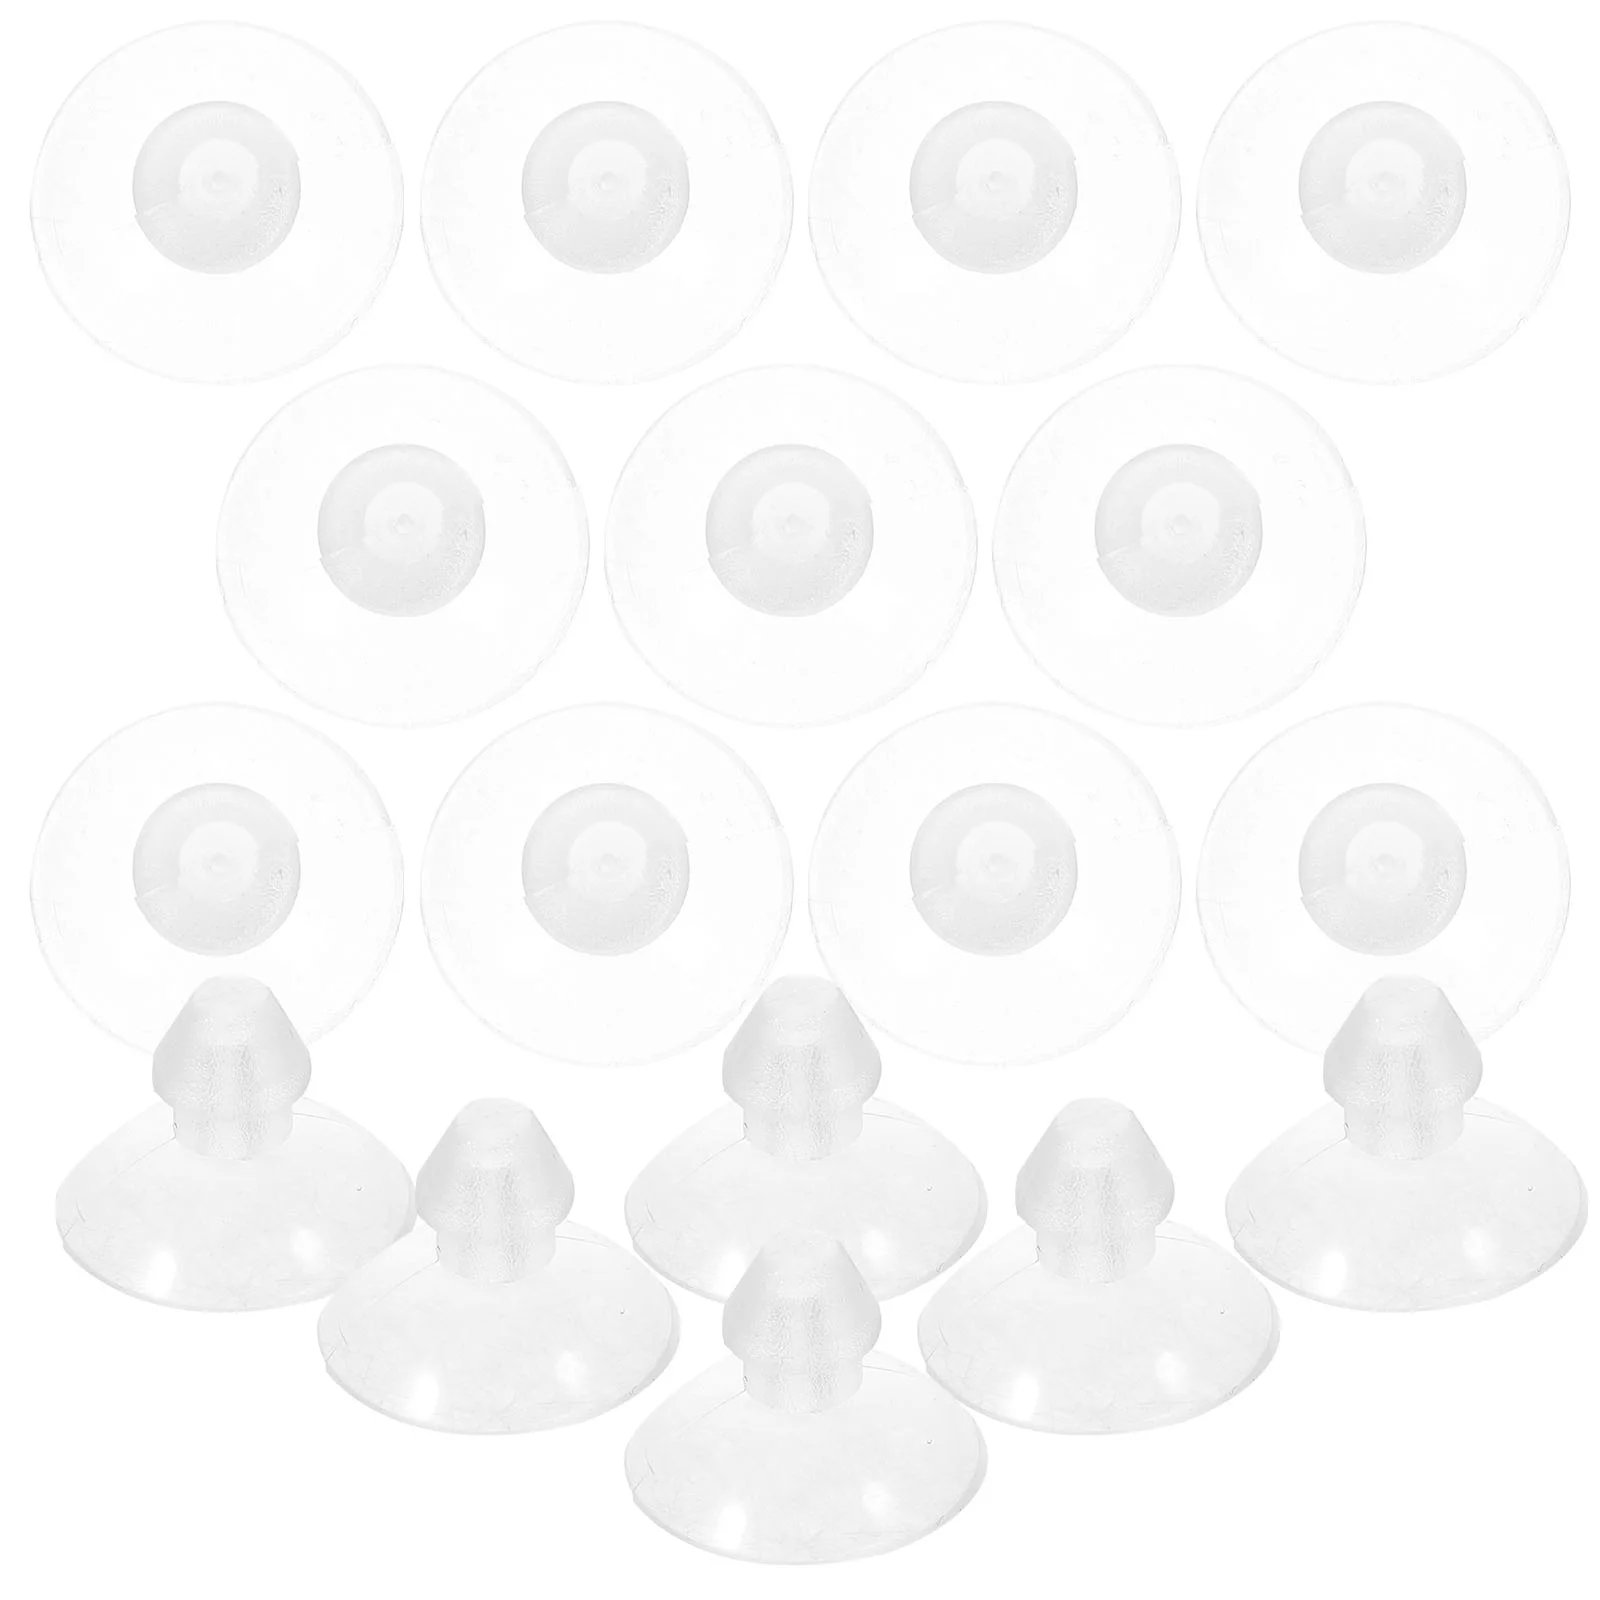 

100pcs Small Suction Cup Accessories Anti-collision Suction Cups Sucker Hanger Pads for Glass